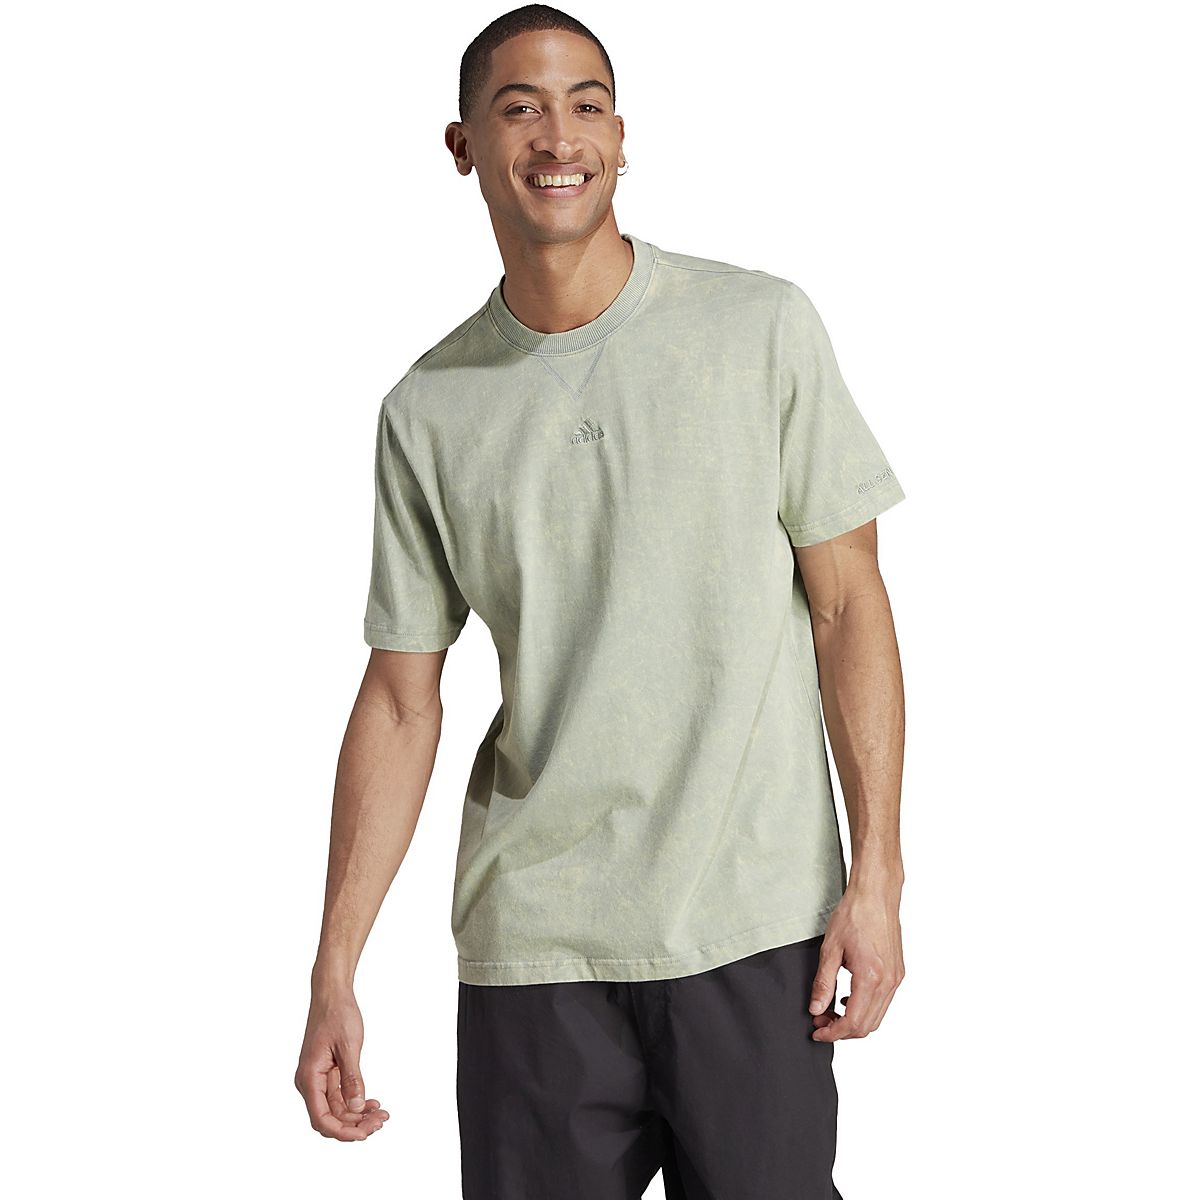 | Washed Academy All Szn at Shipping adidas Men\'s T-shirt Free